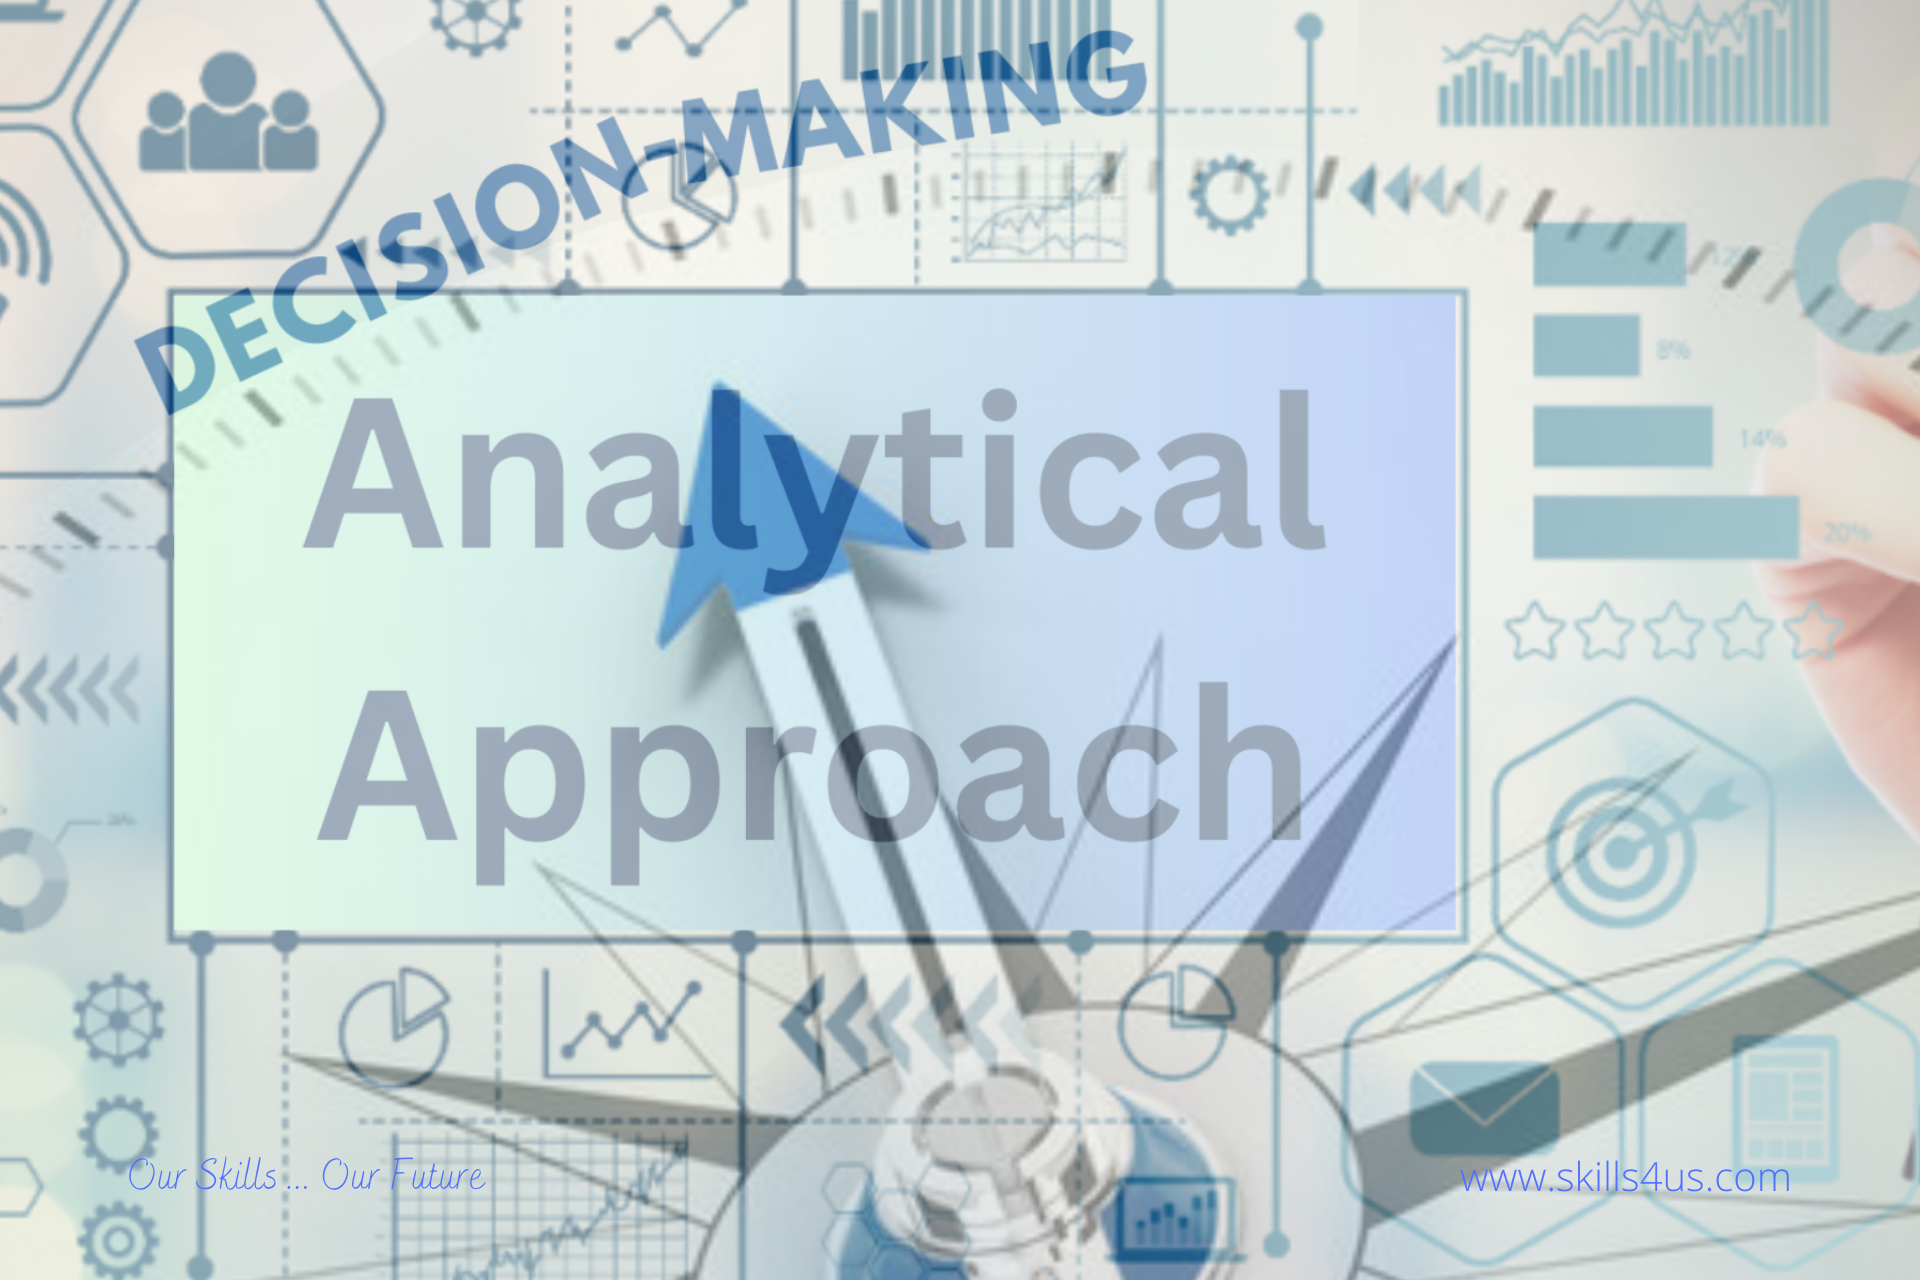 Analytical Approach Of Decision Making Helps Leaders Make Informed And Rational Decisions